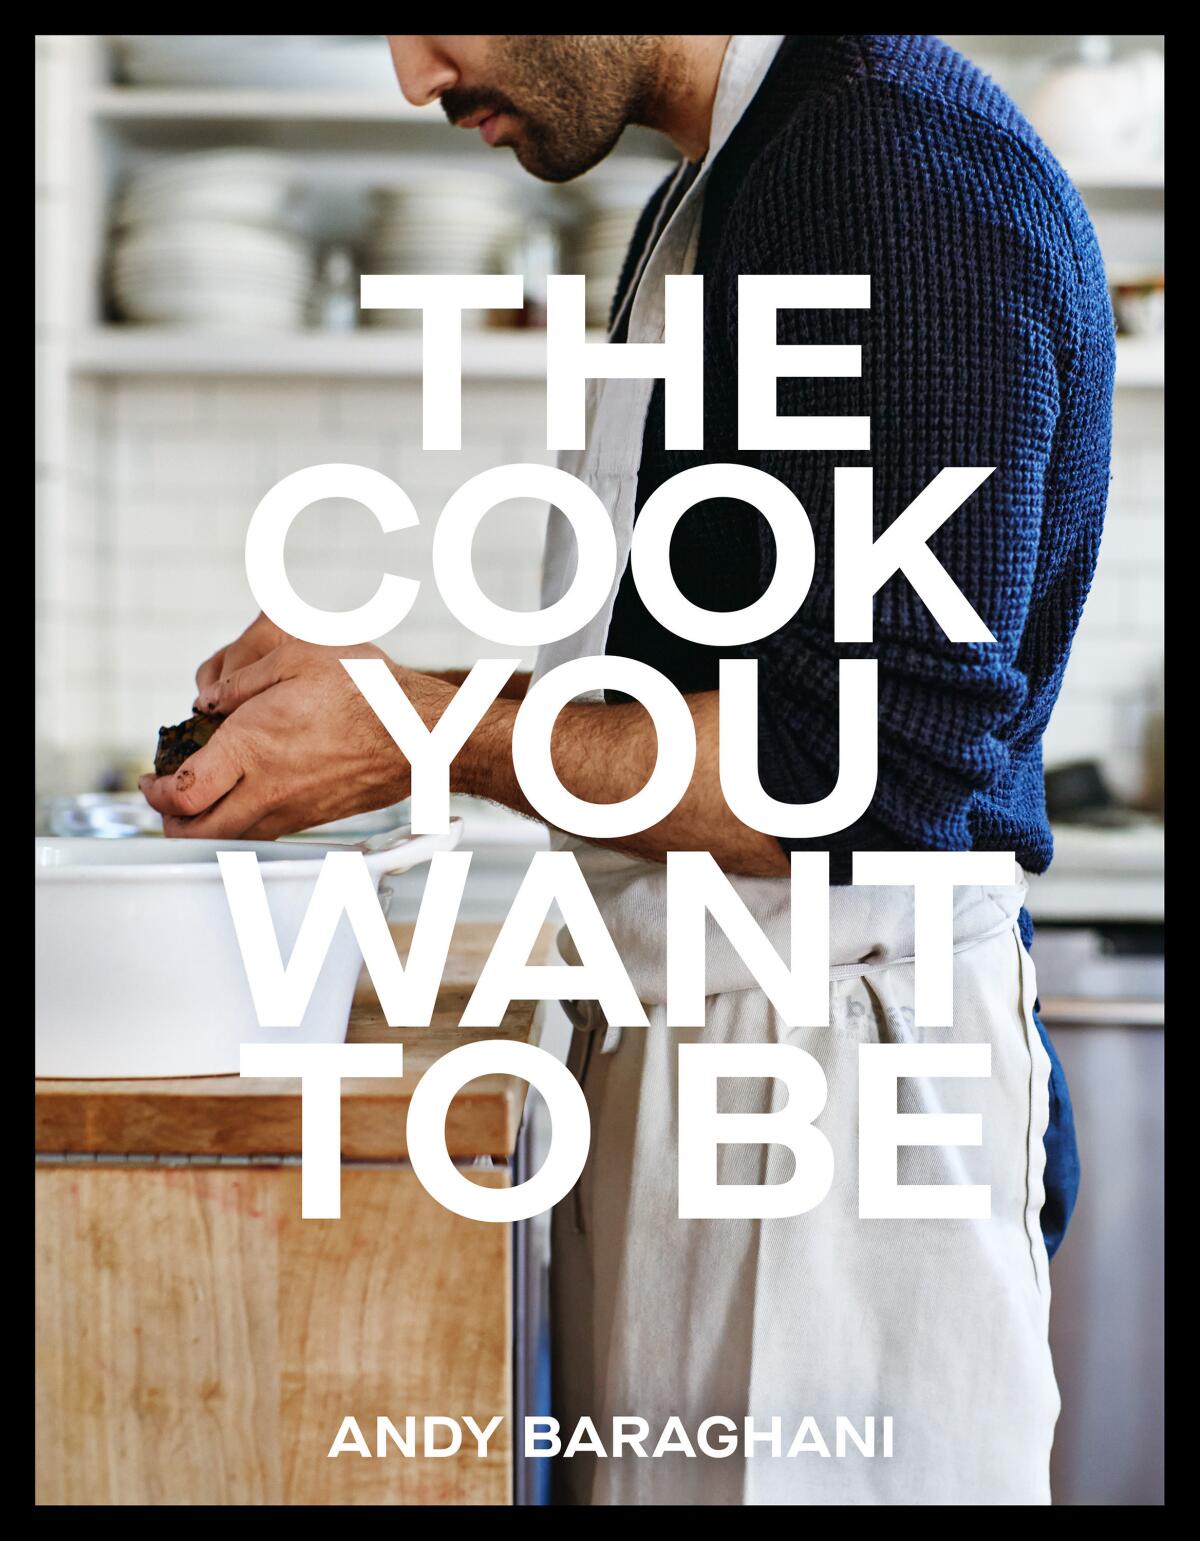 The book jacket for "The Cook You Want to Be," by Andy Baraghani.